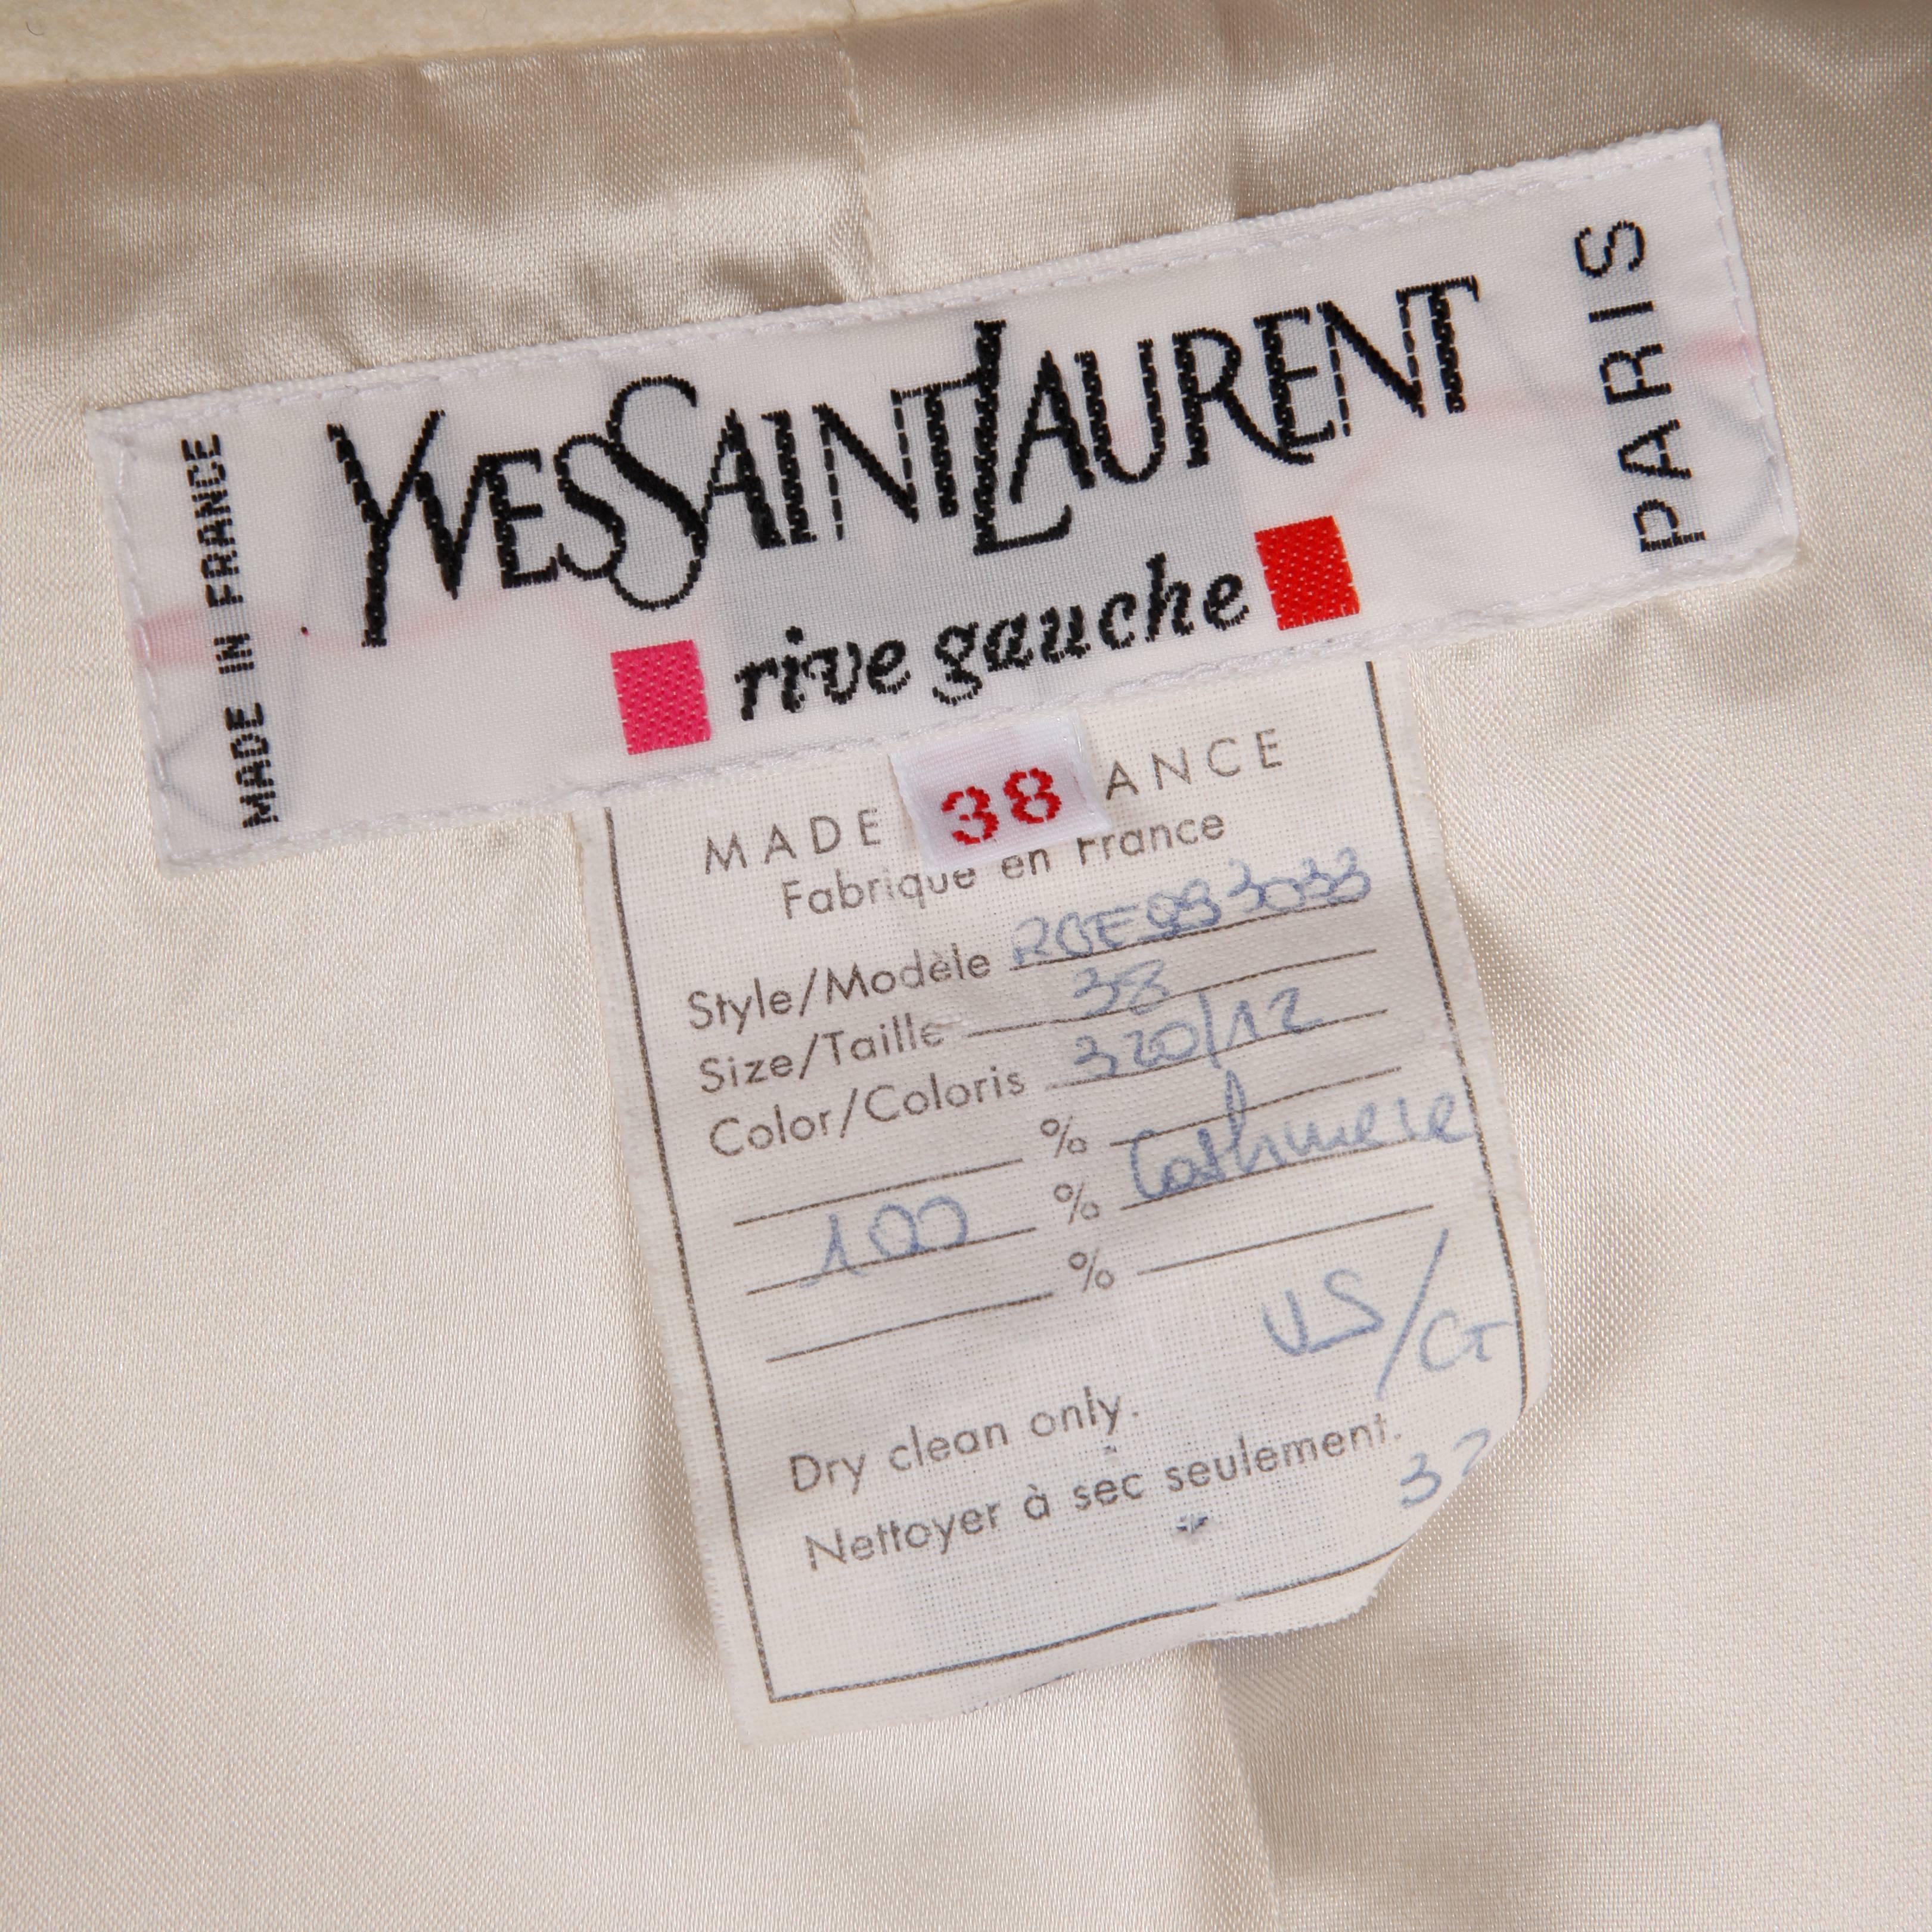 Stunning ivory 100% cashmere jacket by Yves Saint Laurent. Structured collar and front patch pockets. Fully lined. The marked size is 38 and the jacket fits like a modern size small. The bust measures 38", waist 38", shoulders 15",